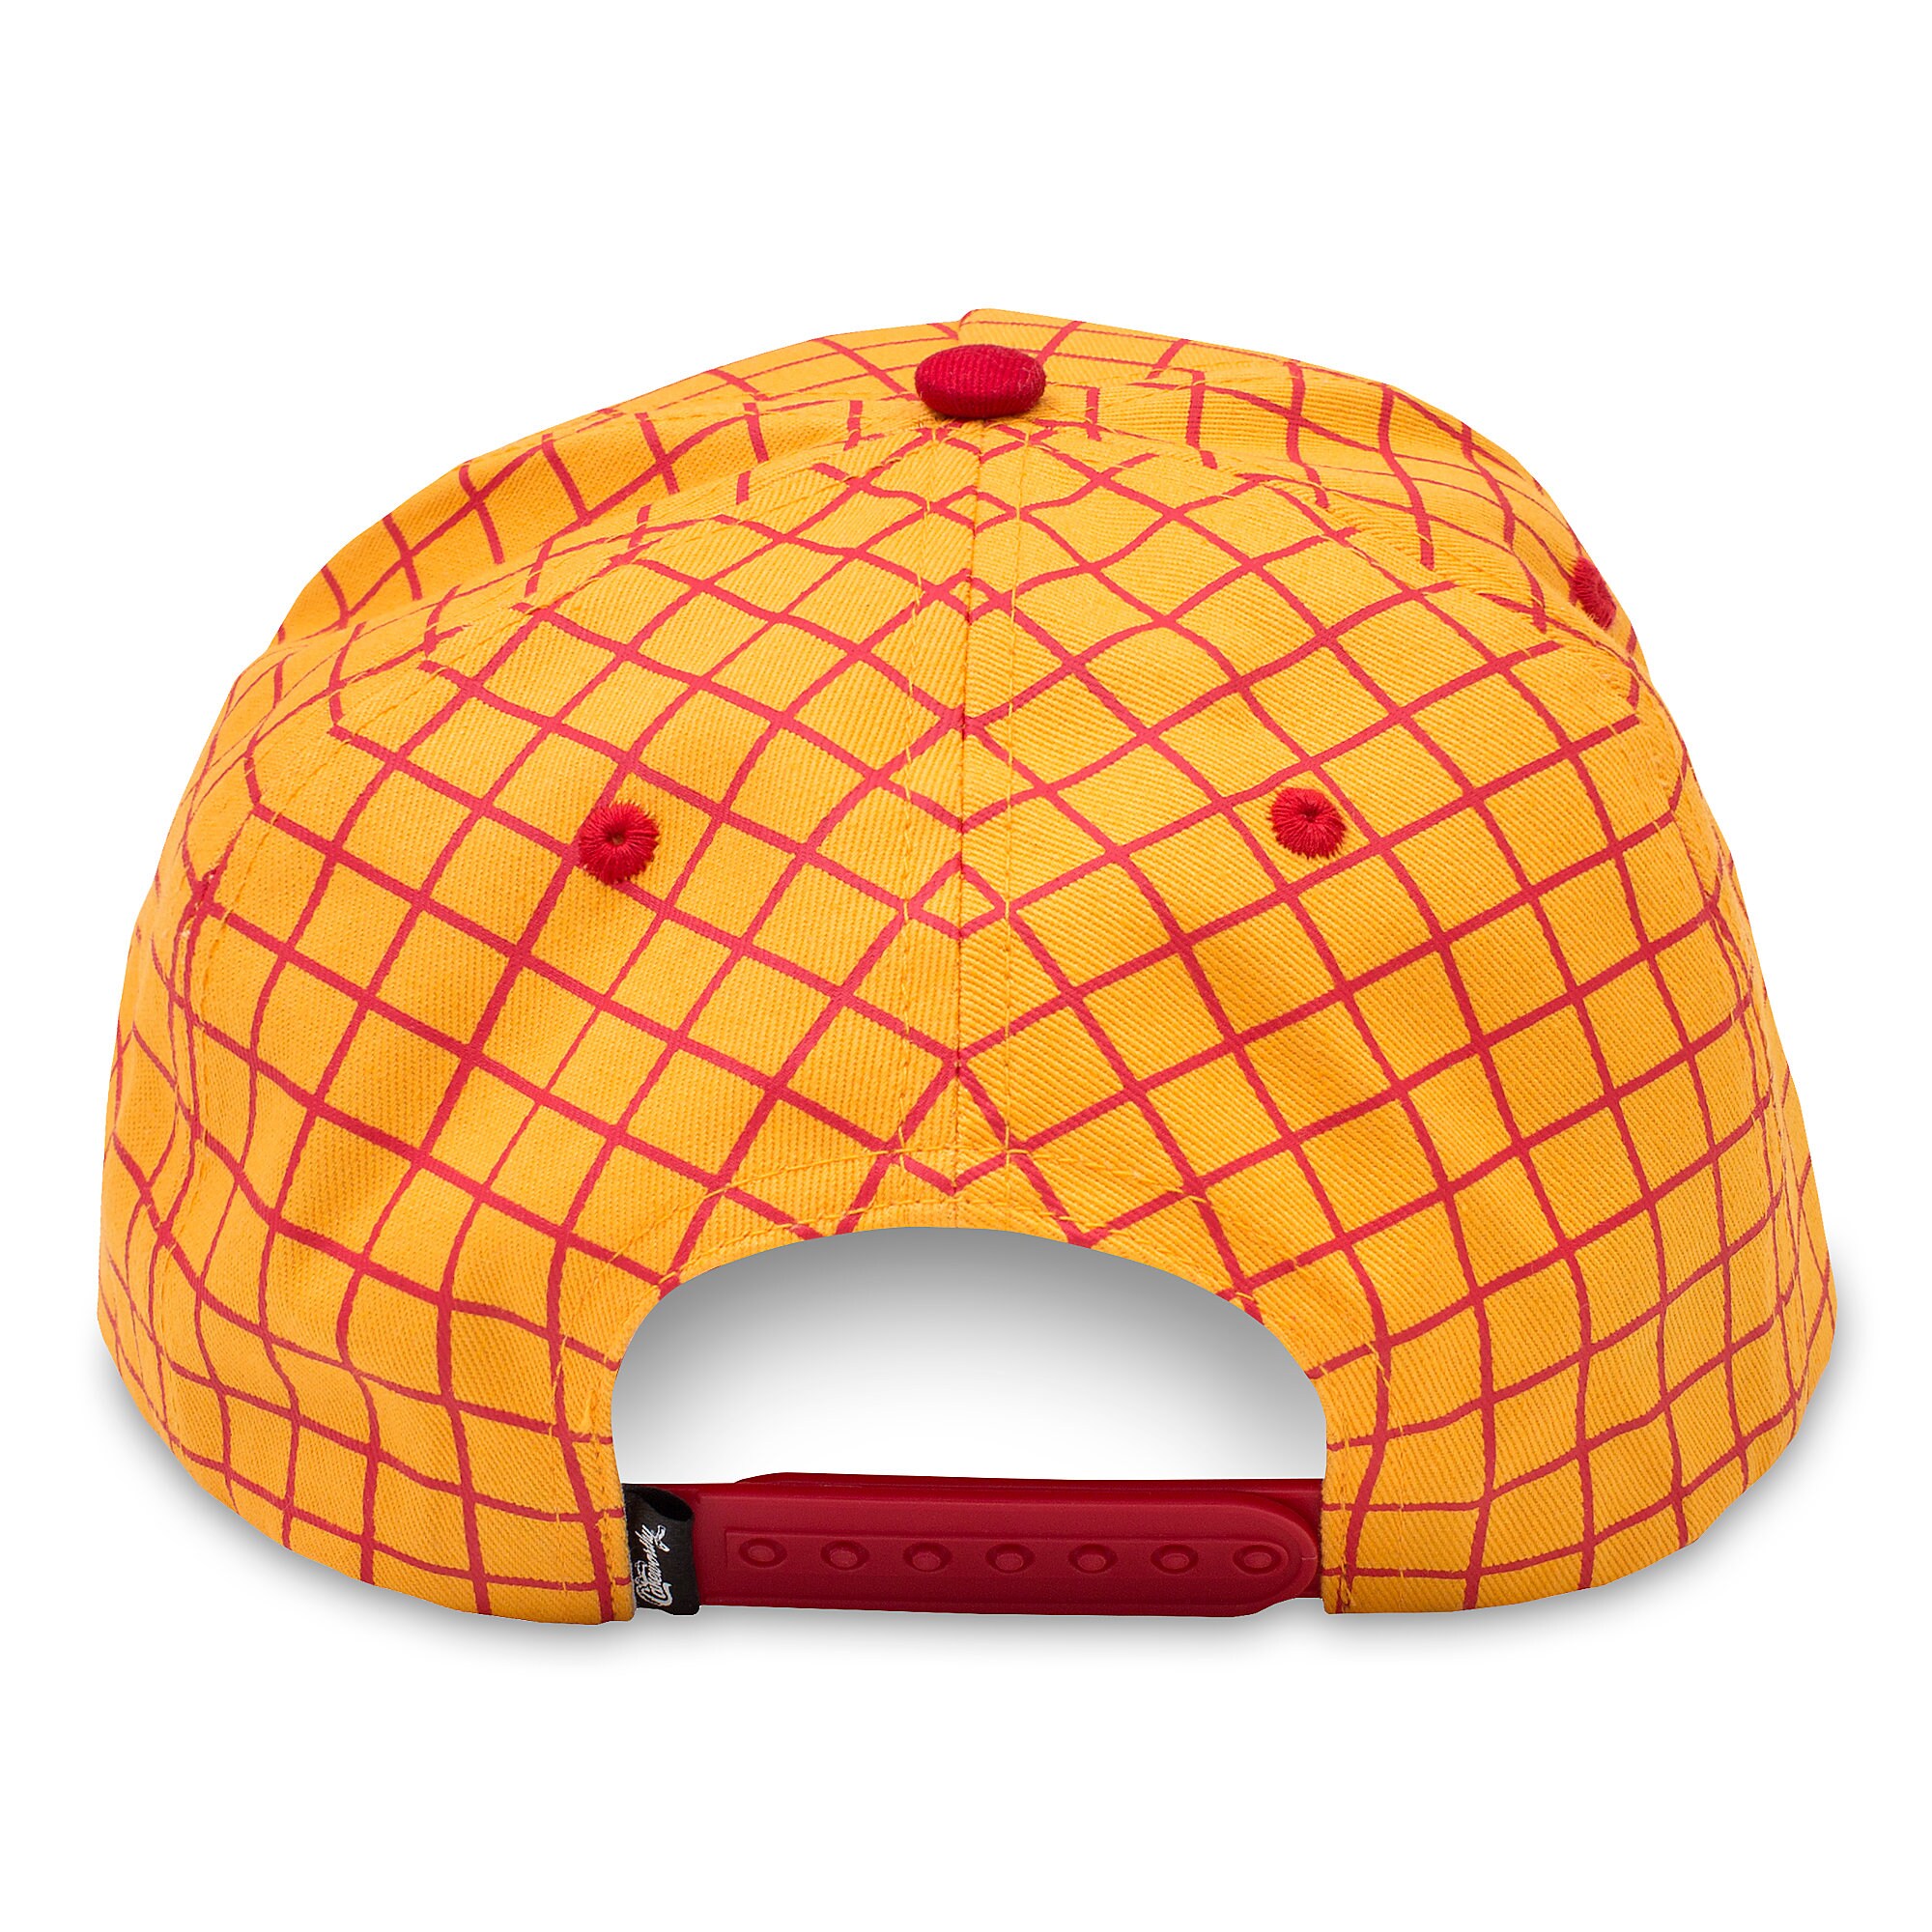 Woody Baseball Cap for Adults by Cakeworthy - Toy Story 4